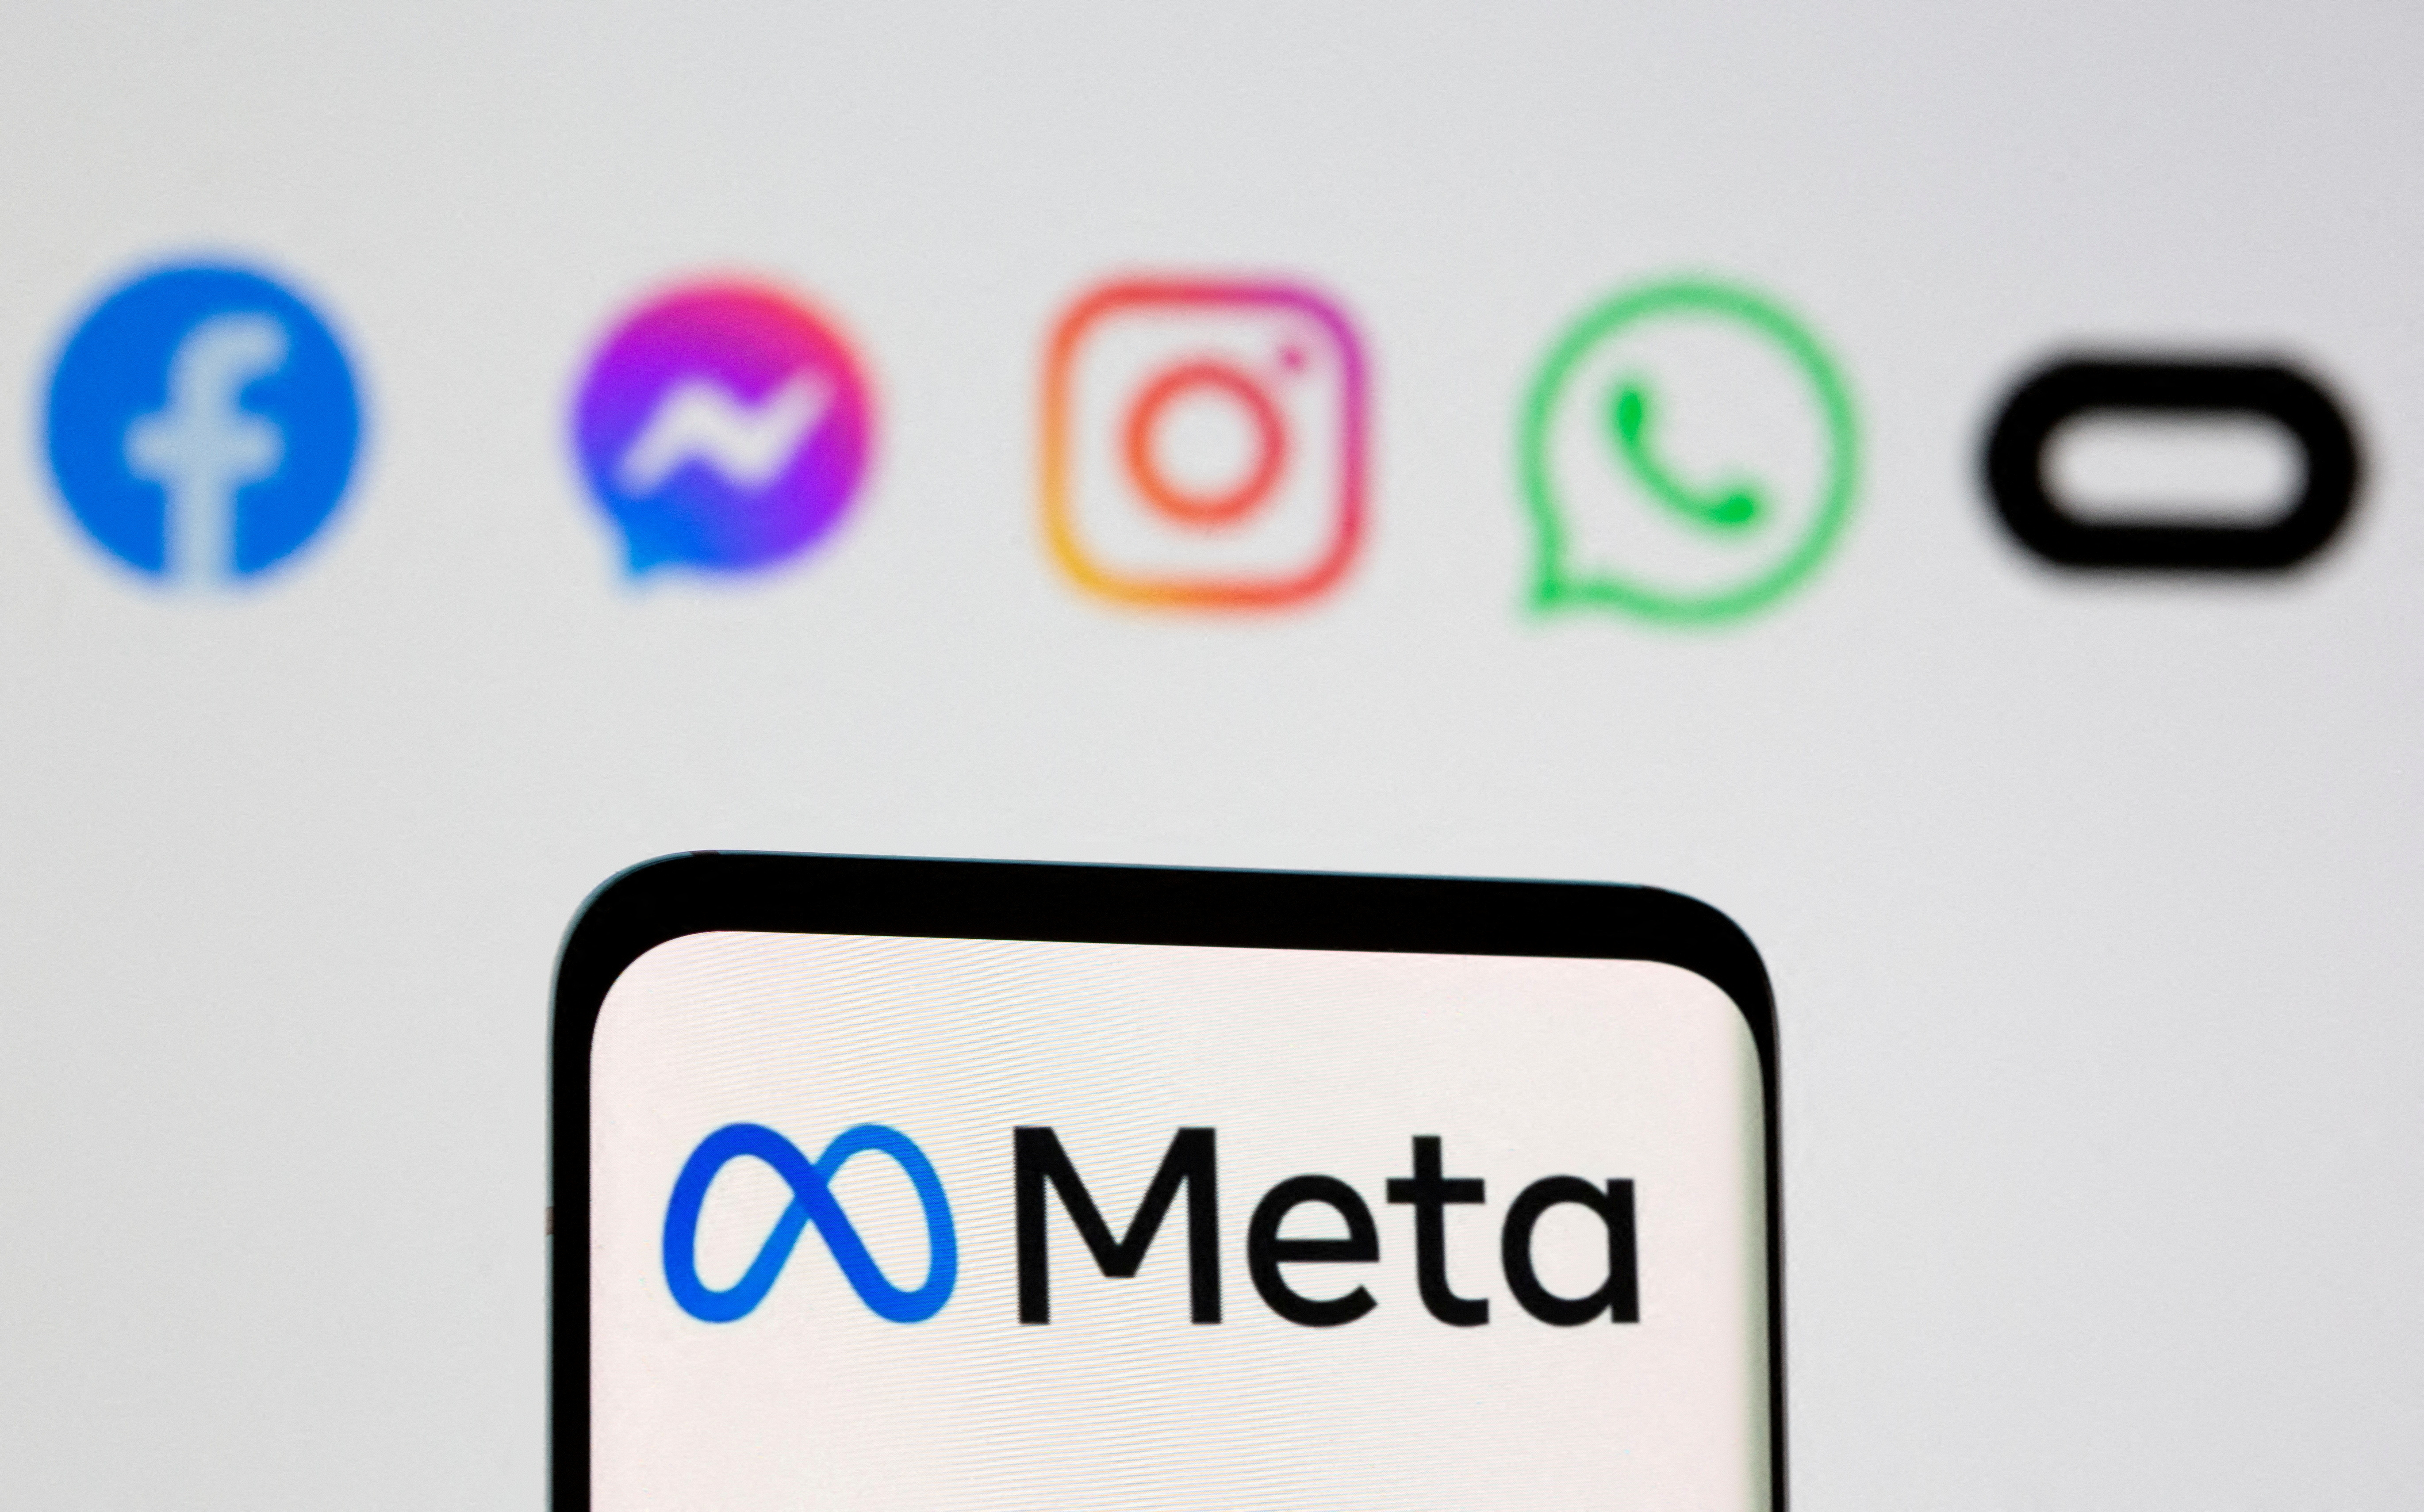 The Meta logo is seen on smartphone in front of displayed logo of Facebook, Messenger, Instagram, WhatsApp, Oculus in this illustration taken